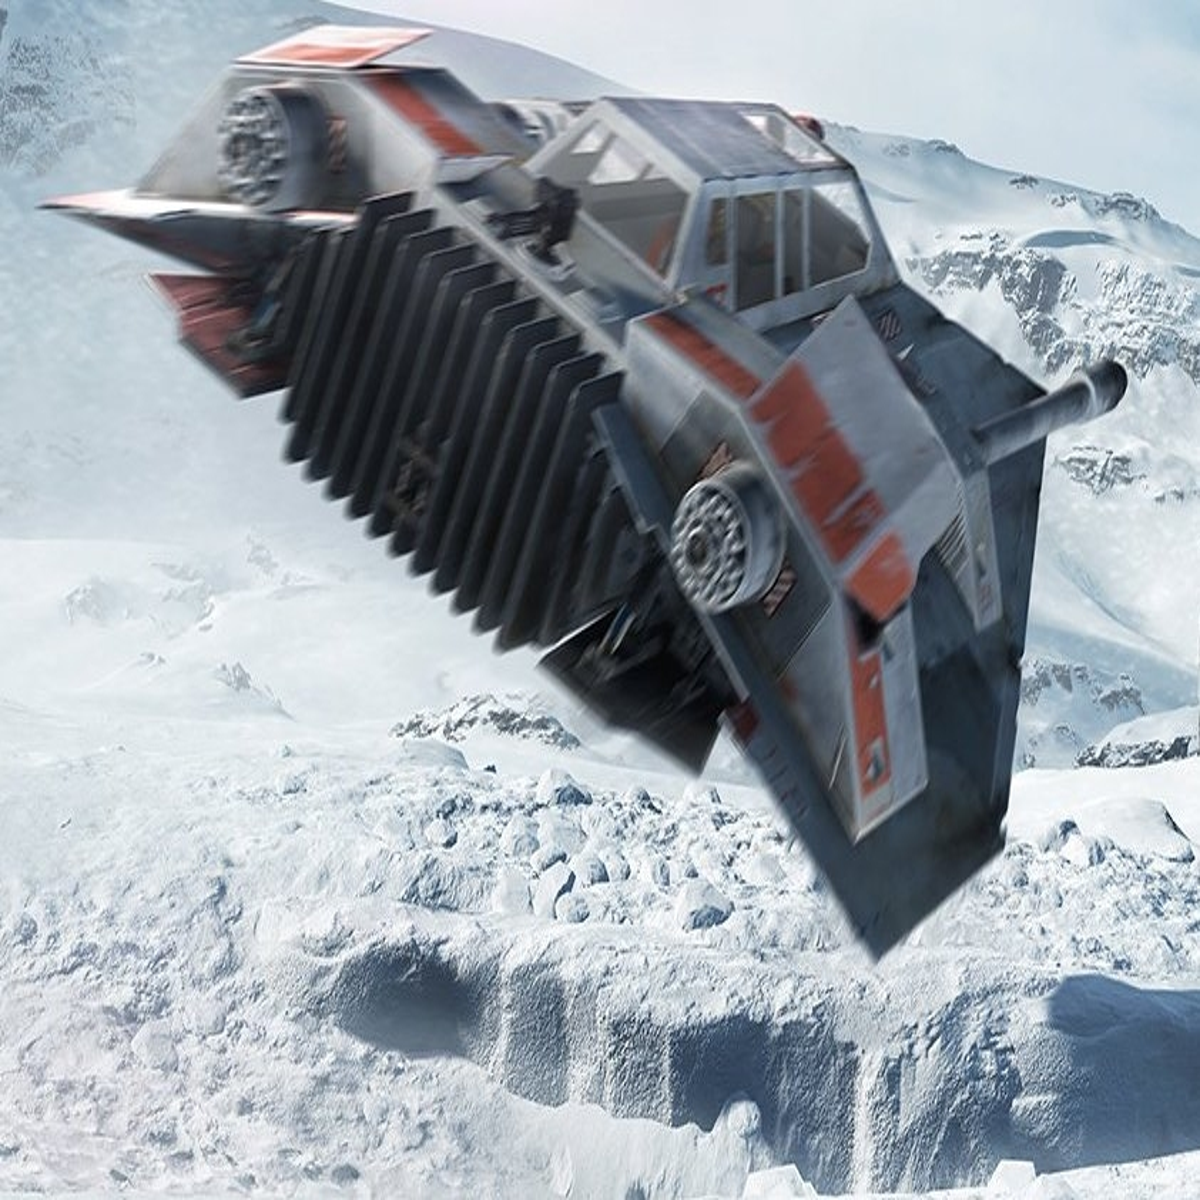 Star Wars Battlefront 2: Frostbite stress-tested on Xbox One X